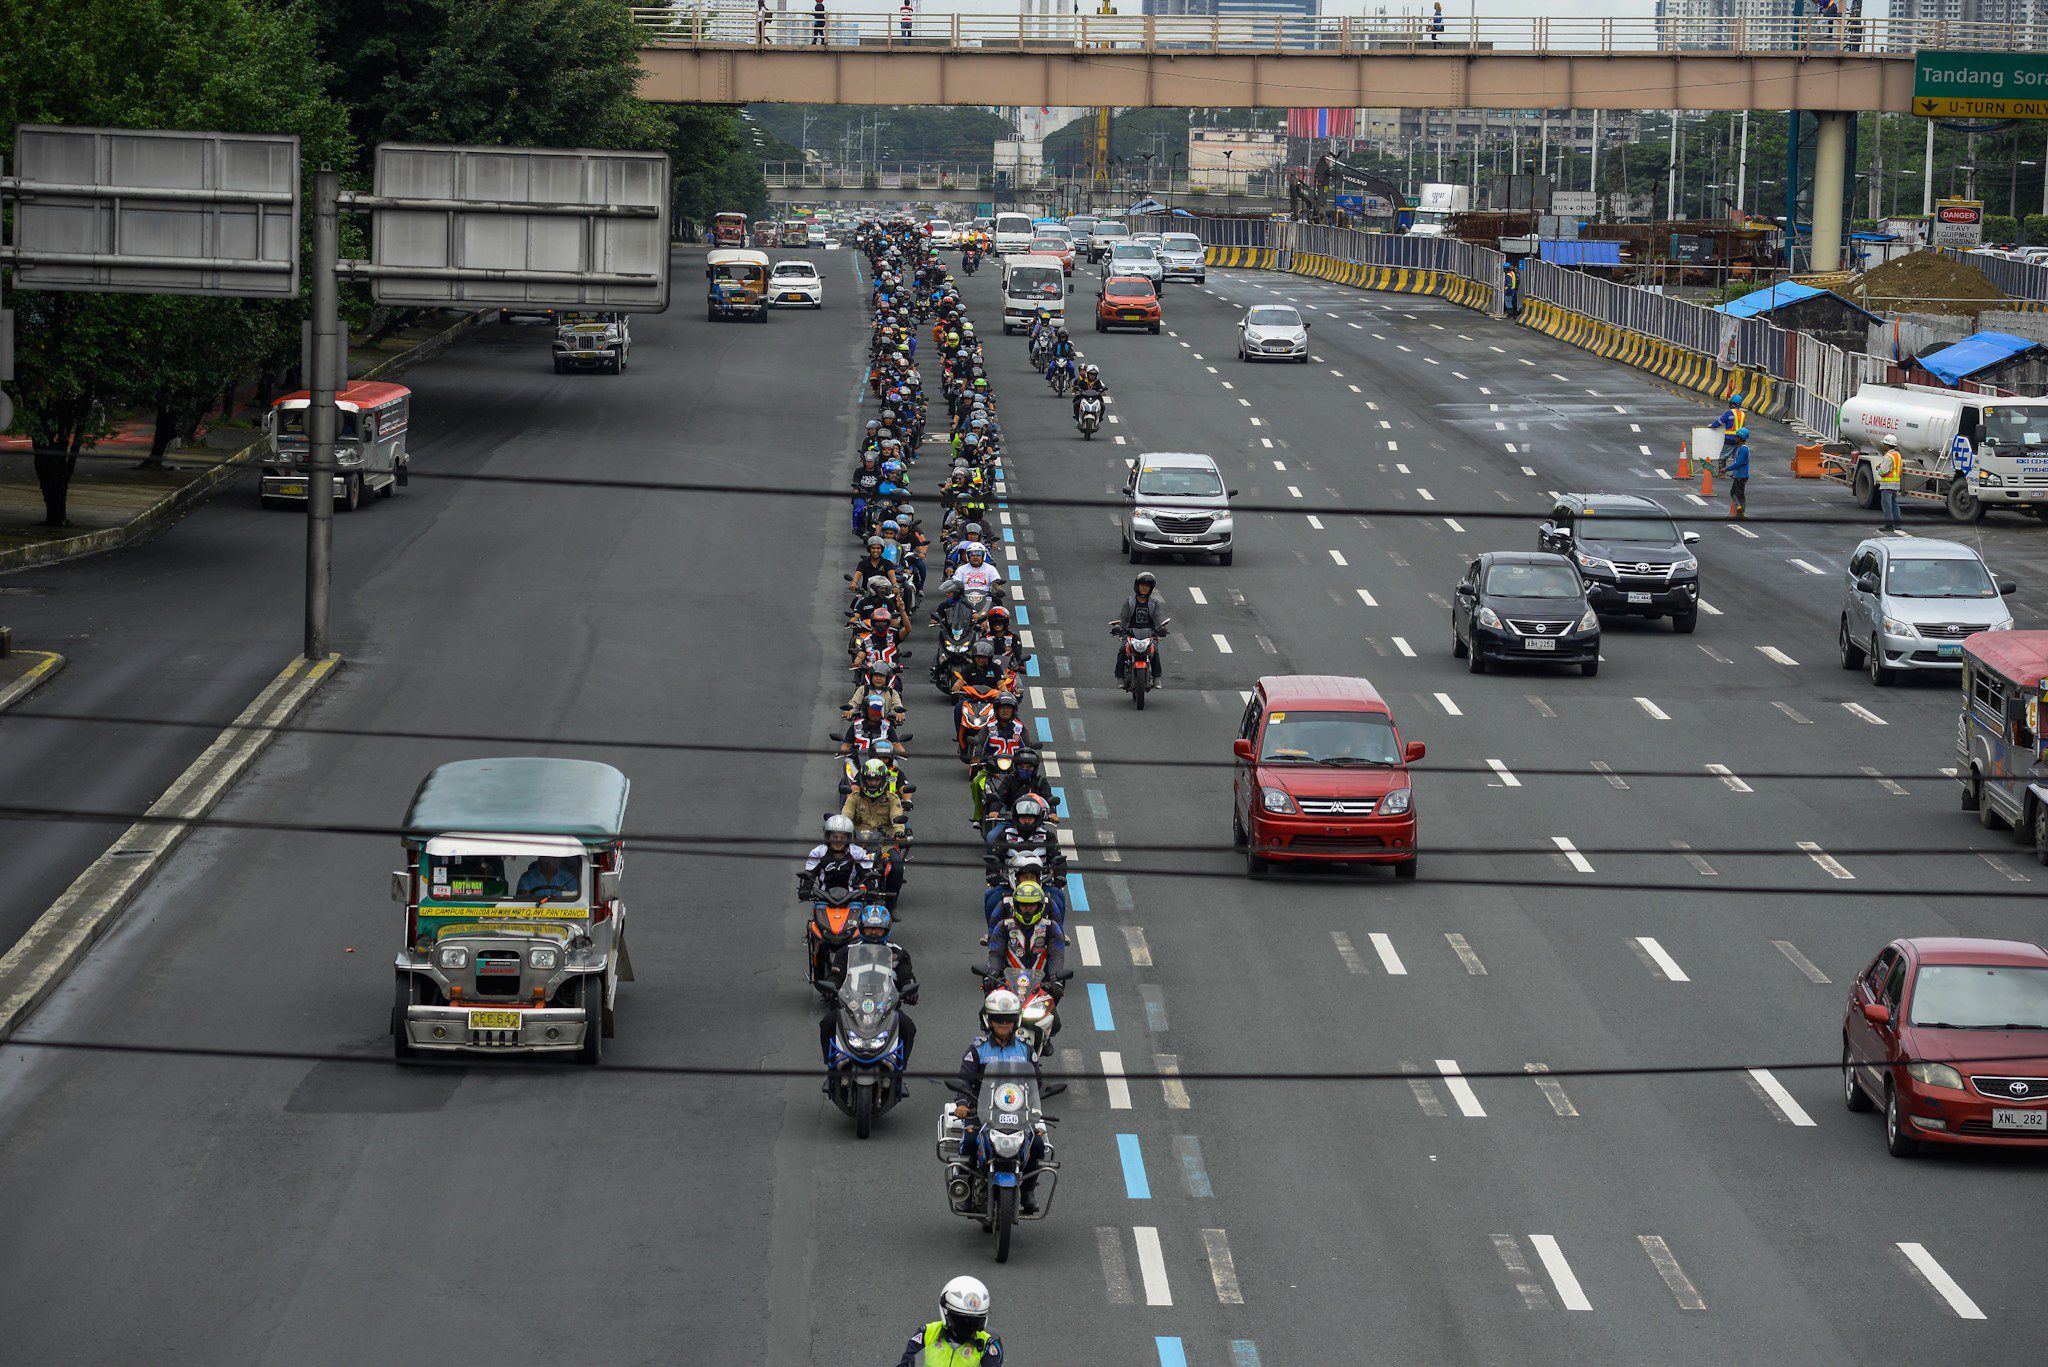 PEACEFUL PROTEST. Riders kept their rally in order by falling in line. Photo by Maria Tan/Rappler 